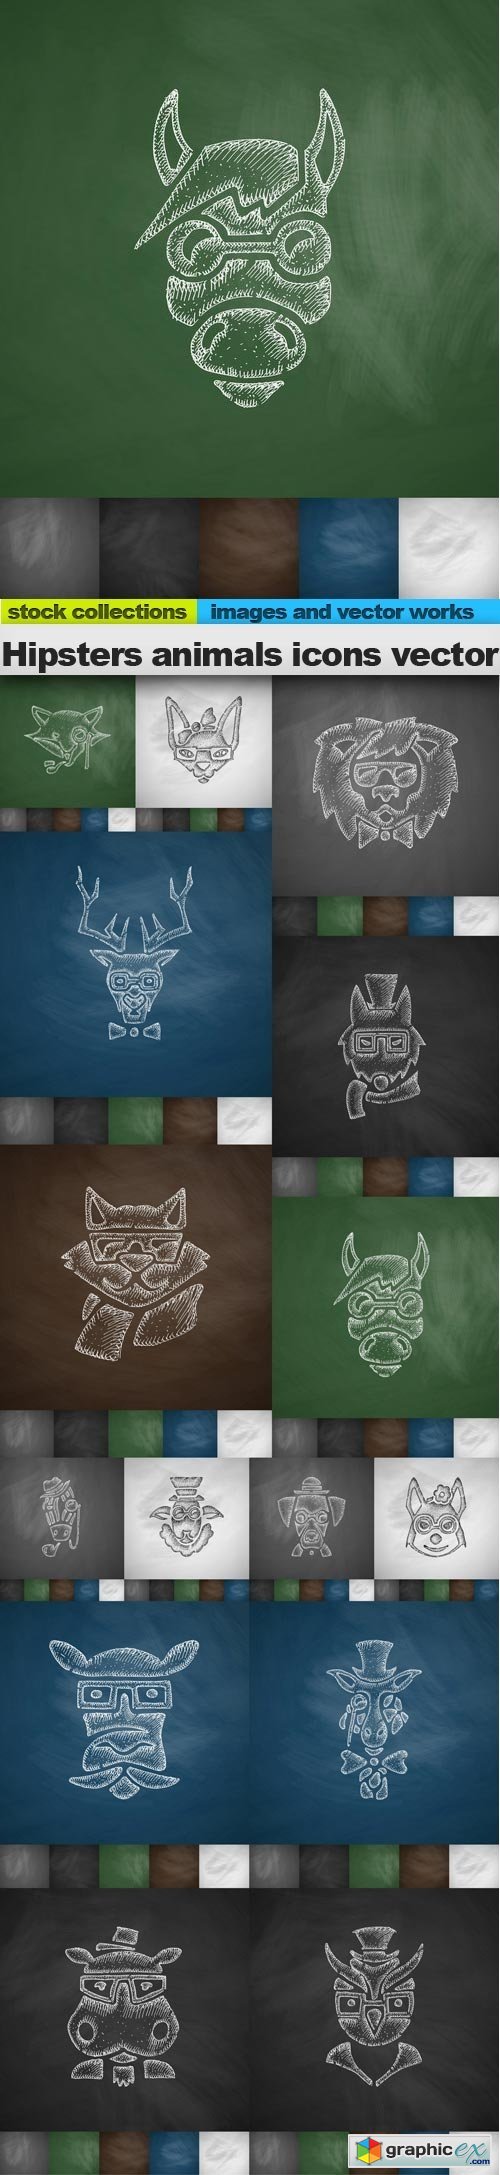 Hipsters animals icons vector, 15 x EPS